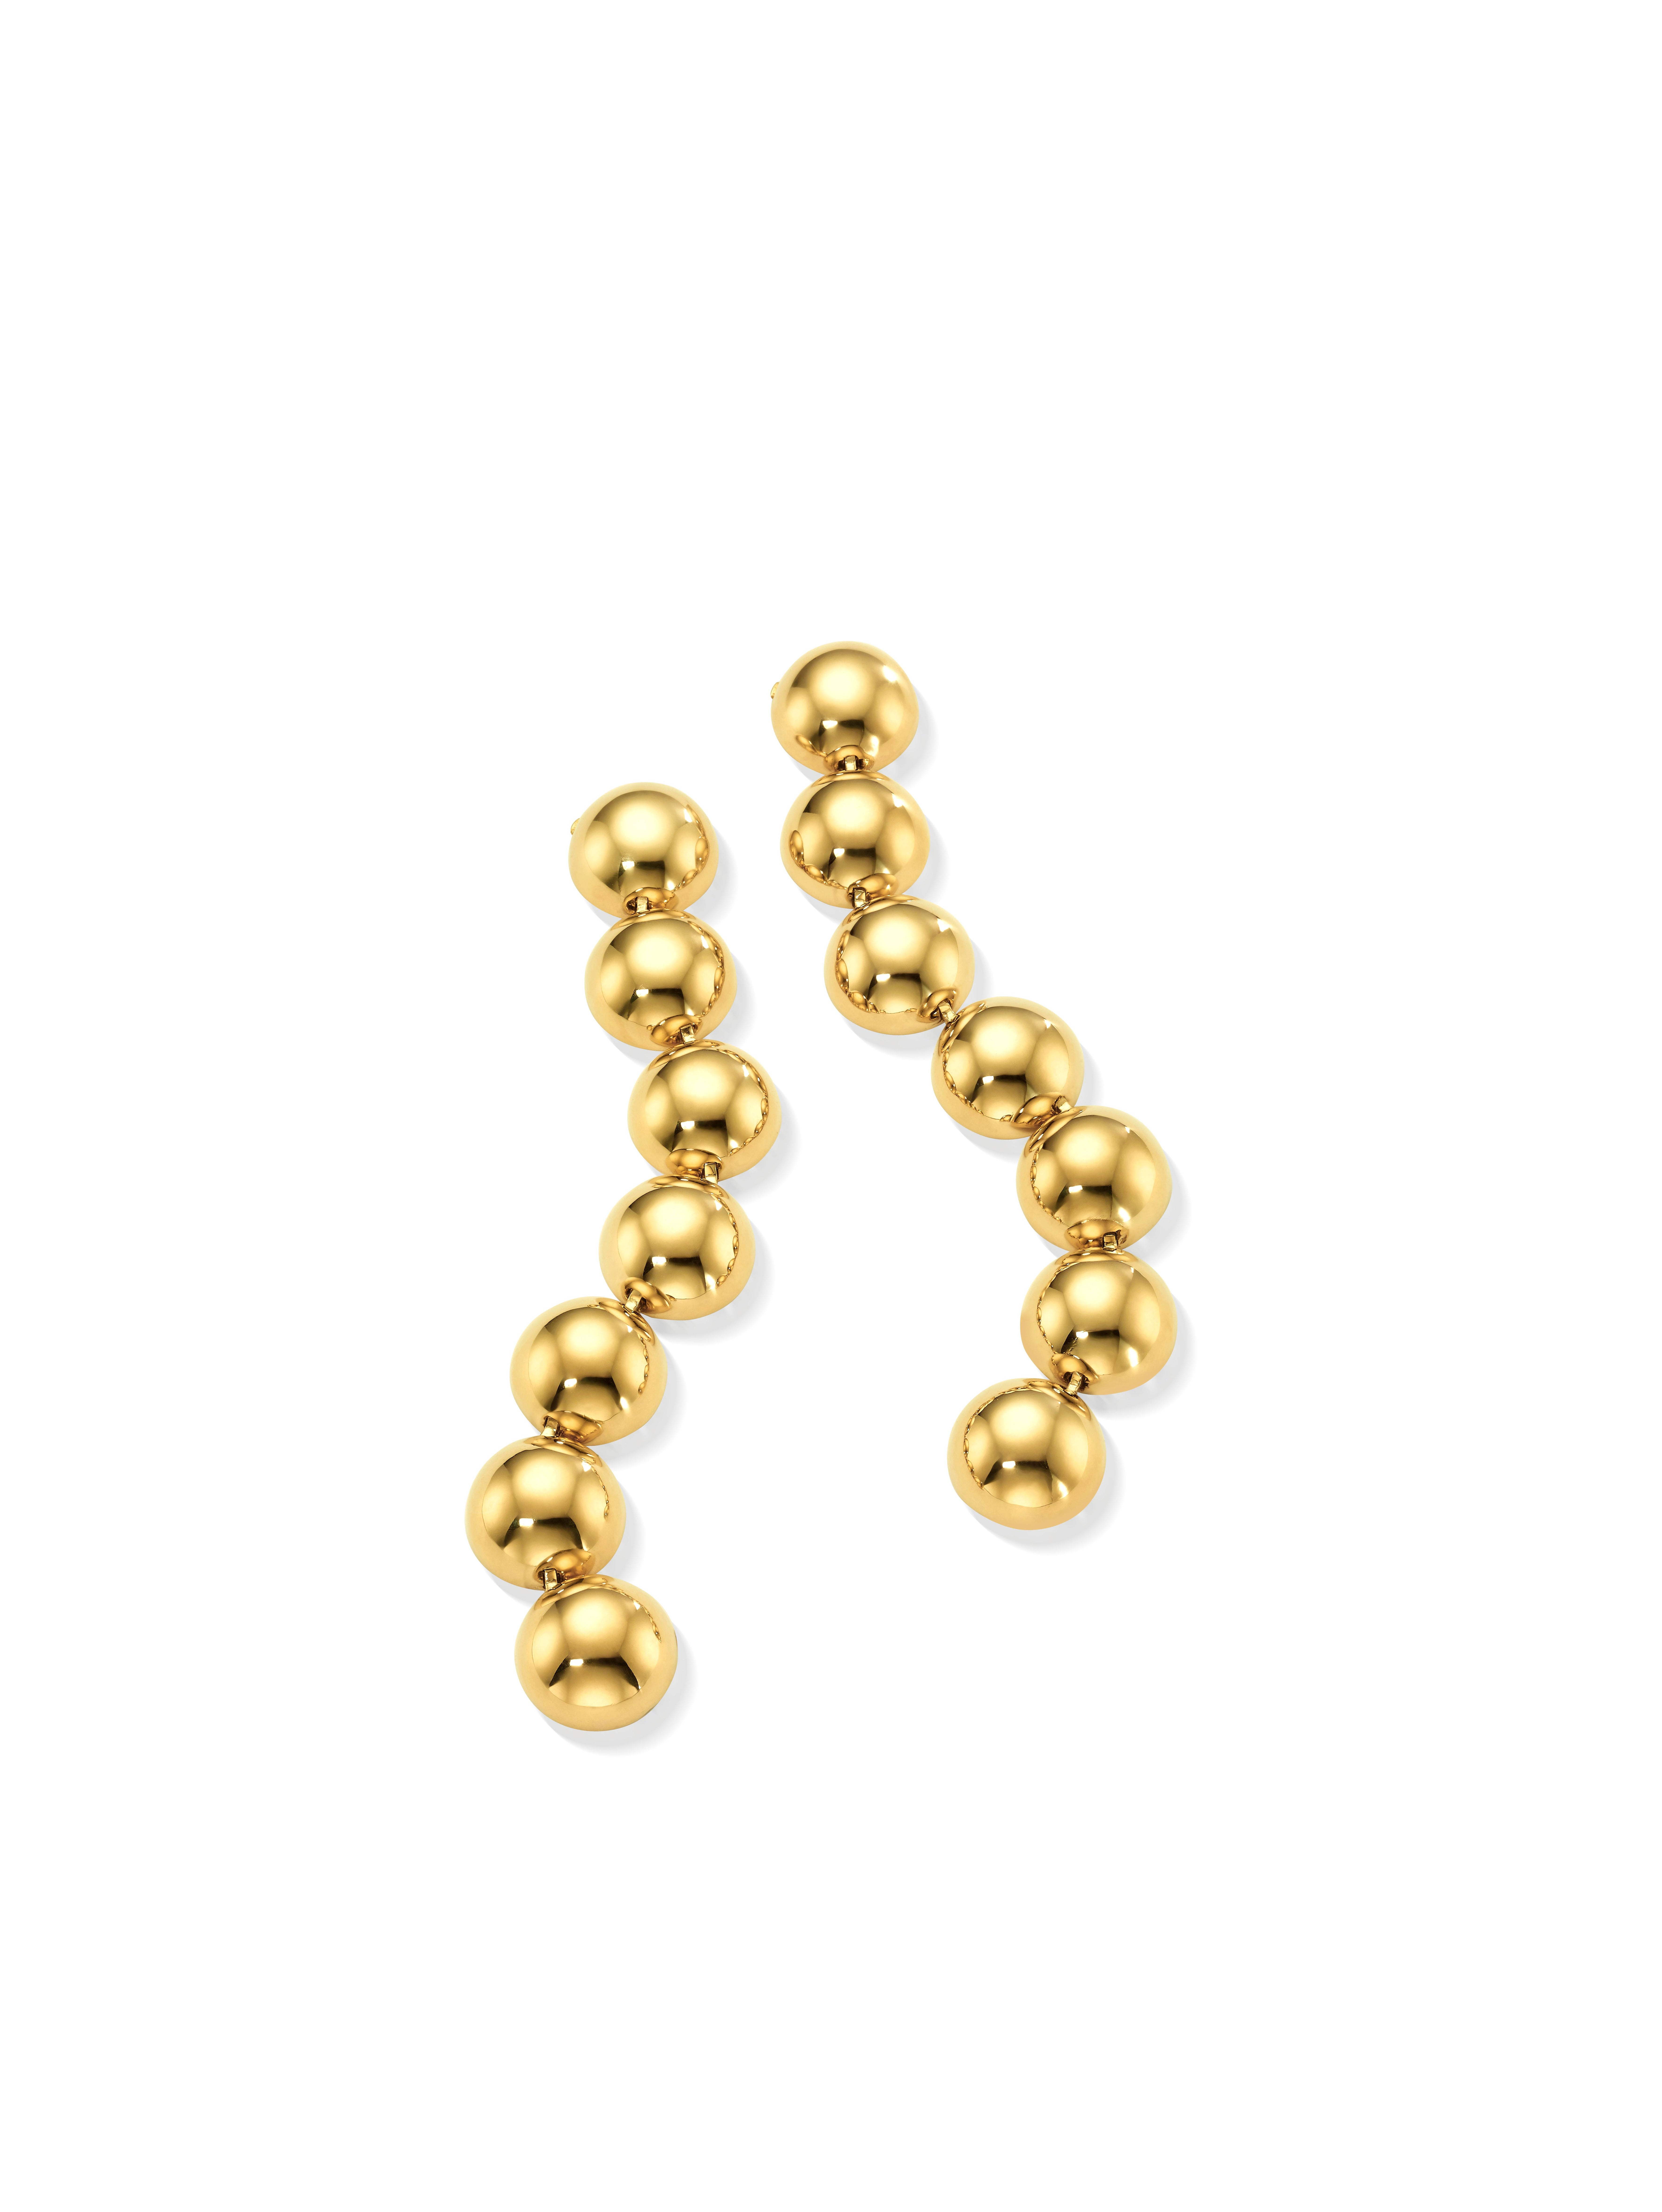 Golden bubbles. Hemispheric droplets cascade from the ear, forming a gorgeous column that gracefully elongates the neck. Handcrafted in 18k high polished gold. Also available in size small and medium.

From the CADAR Psyche Collection
